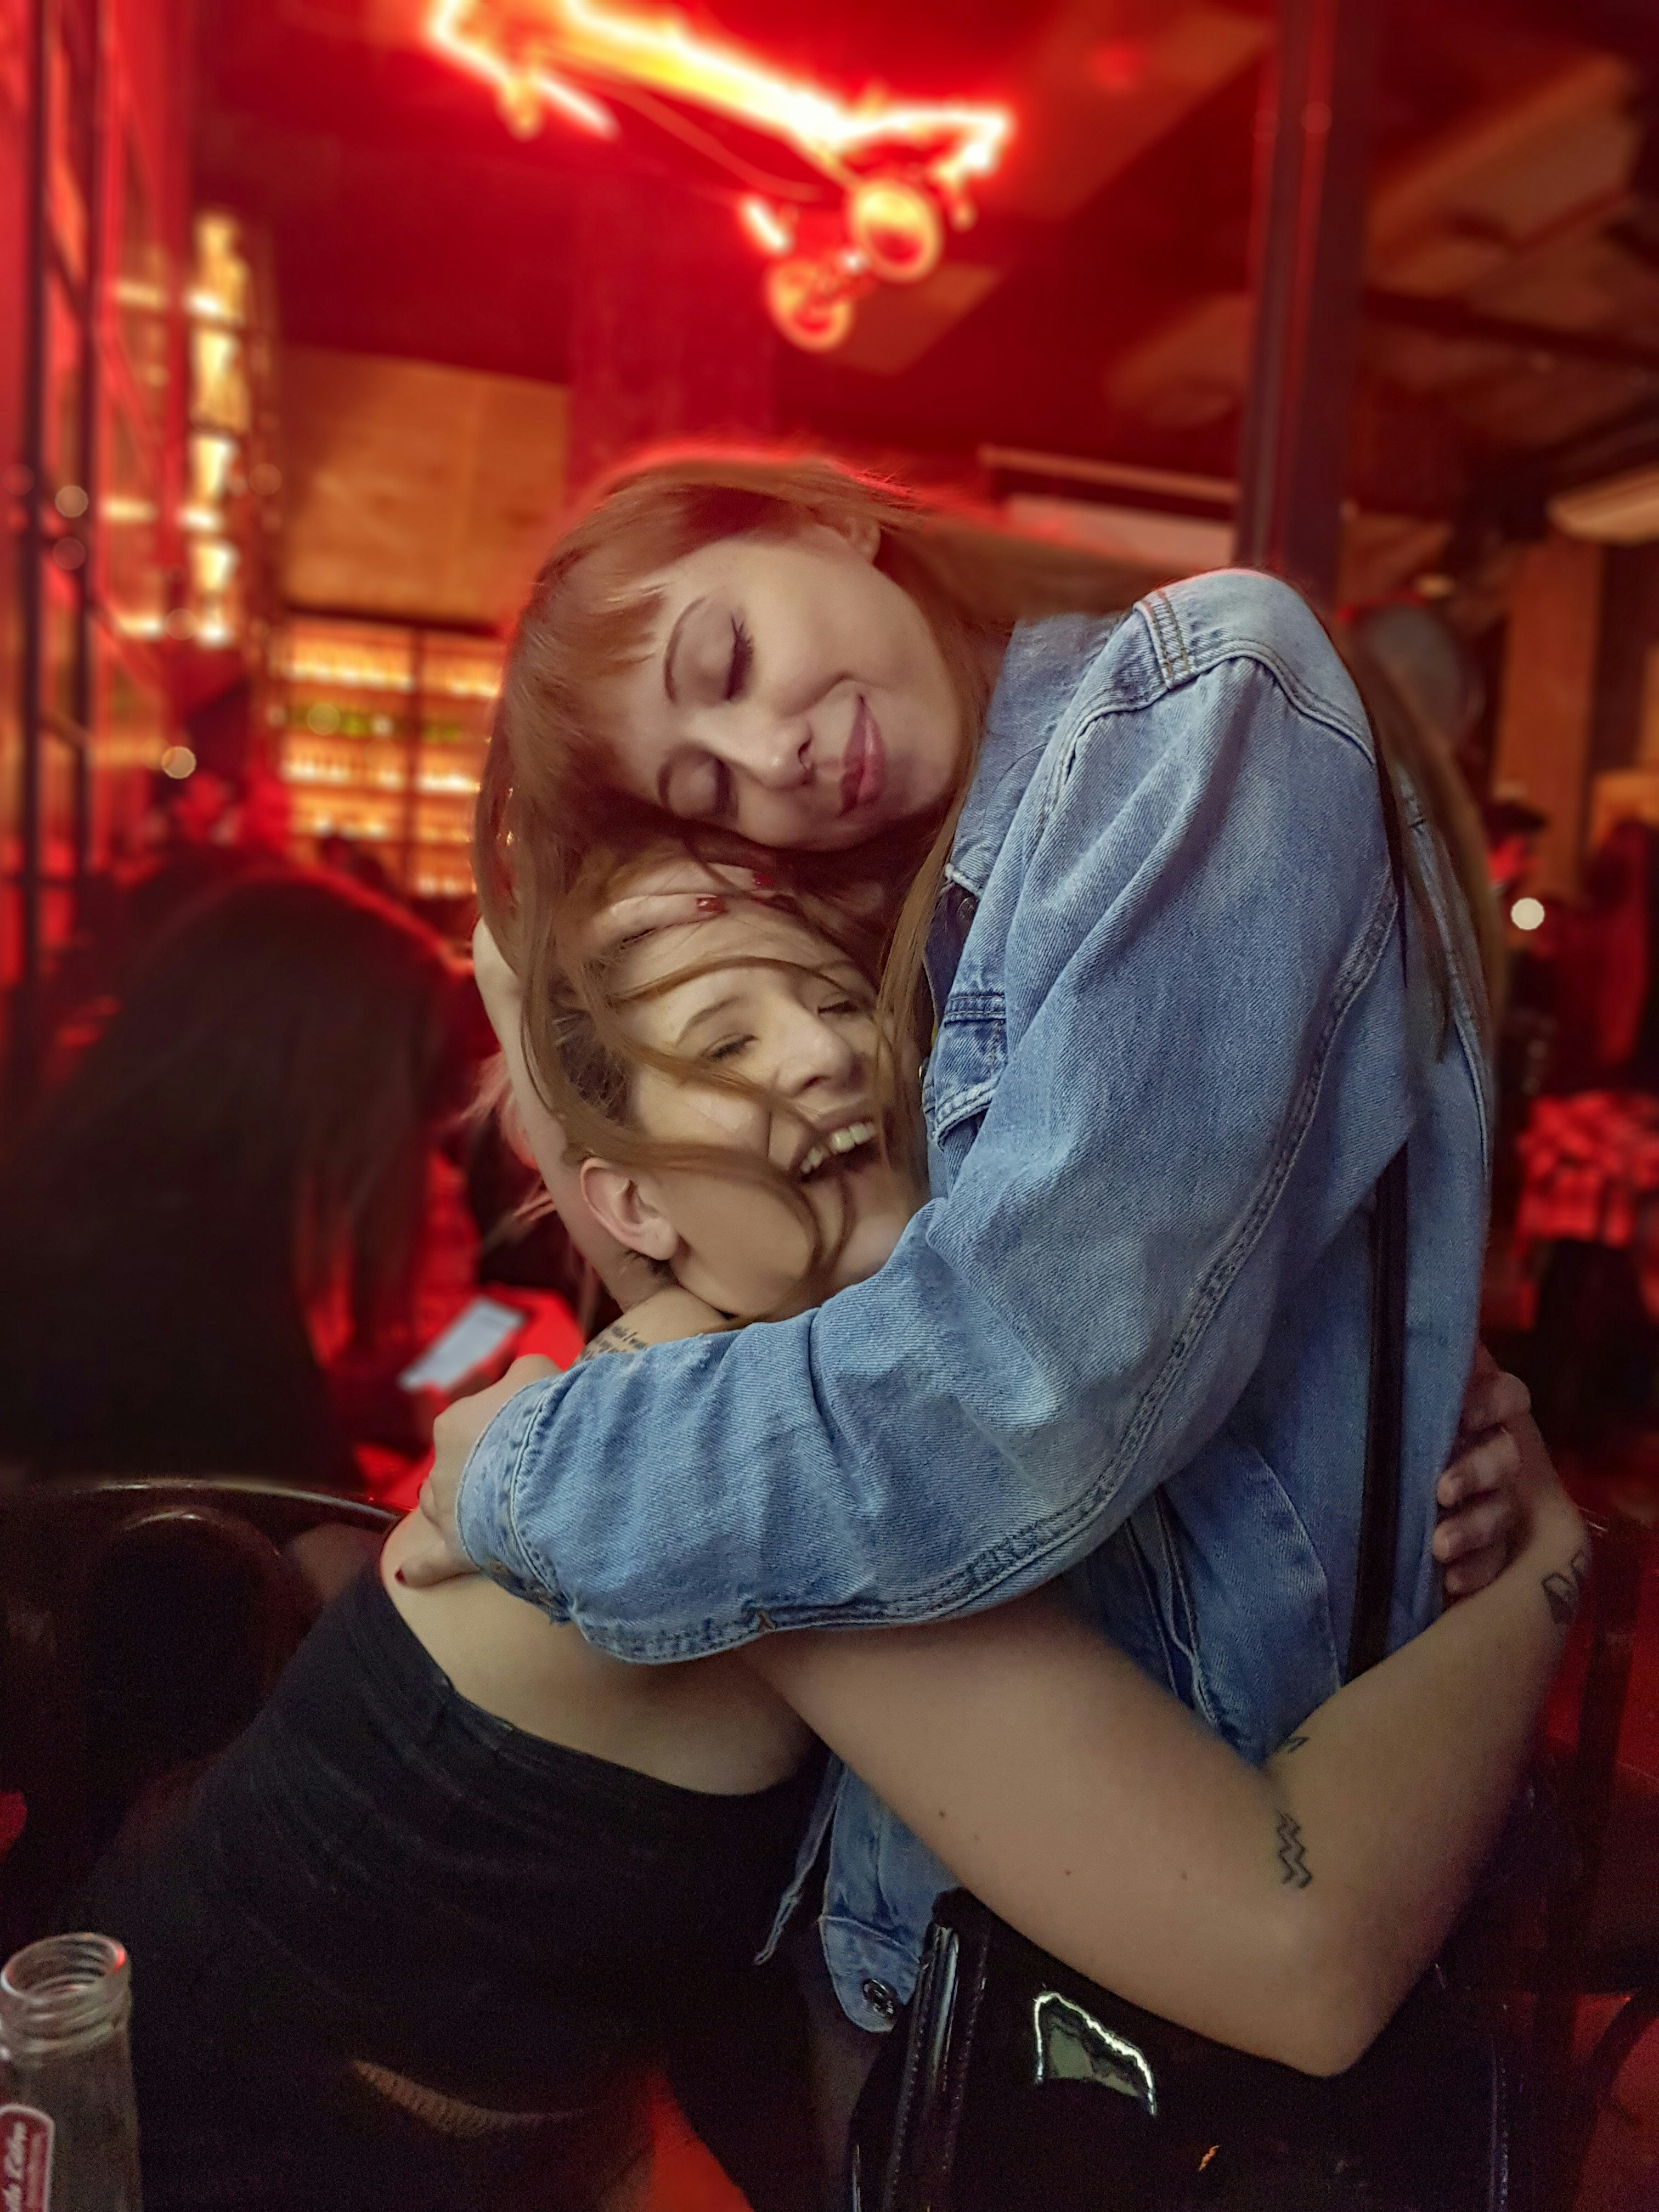 Lovely girls In a very care moment, In an Bar at São Paulo, Brazil.